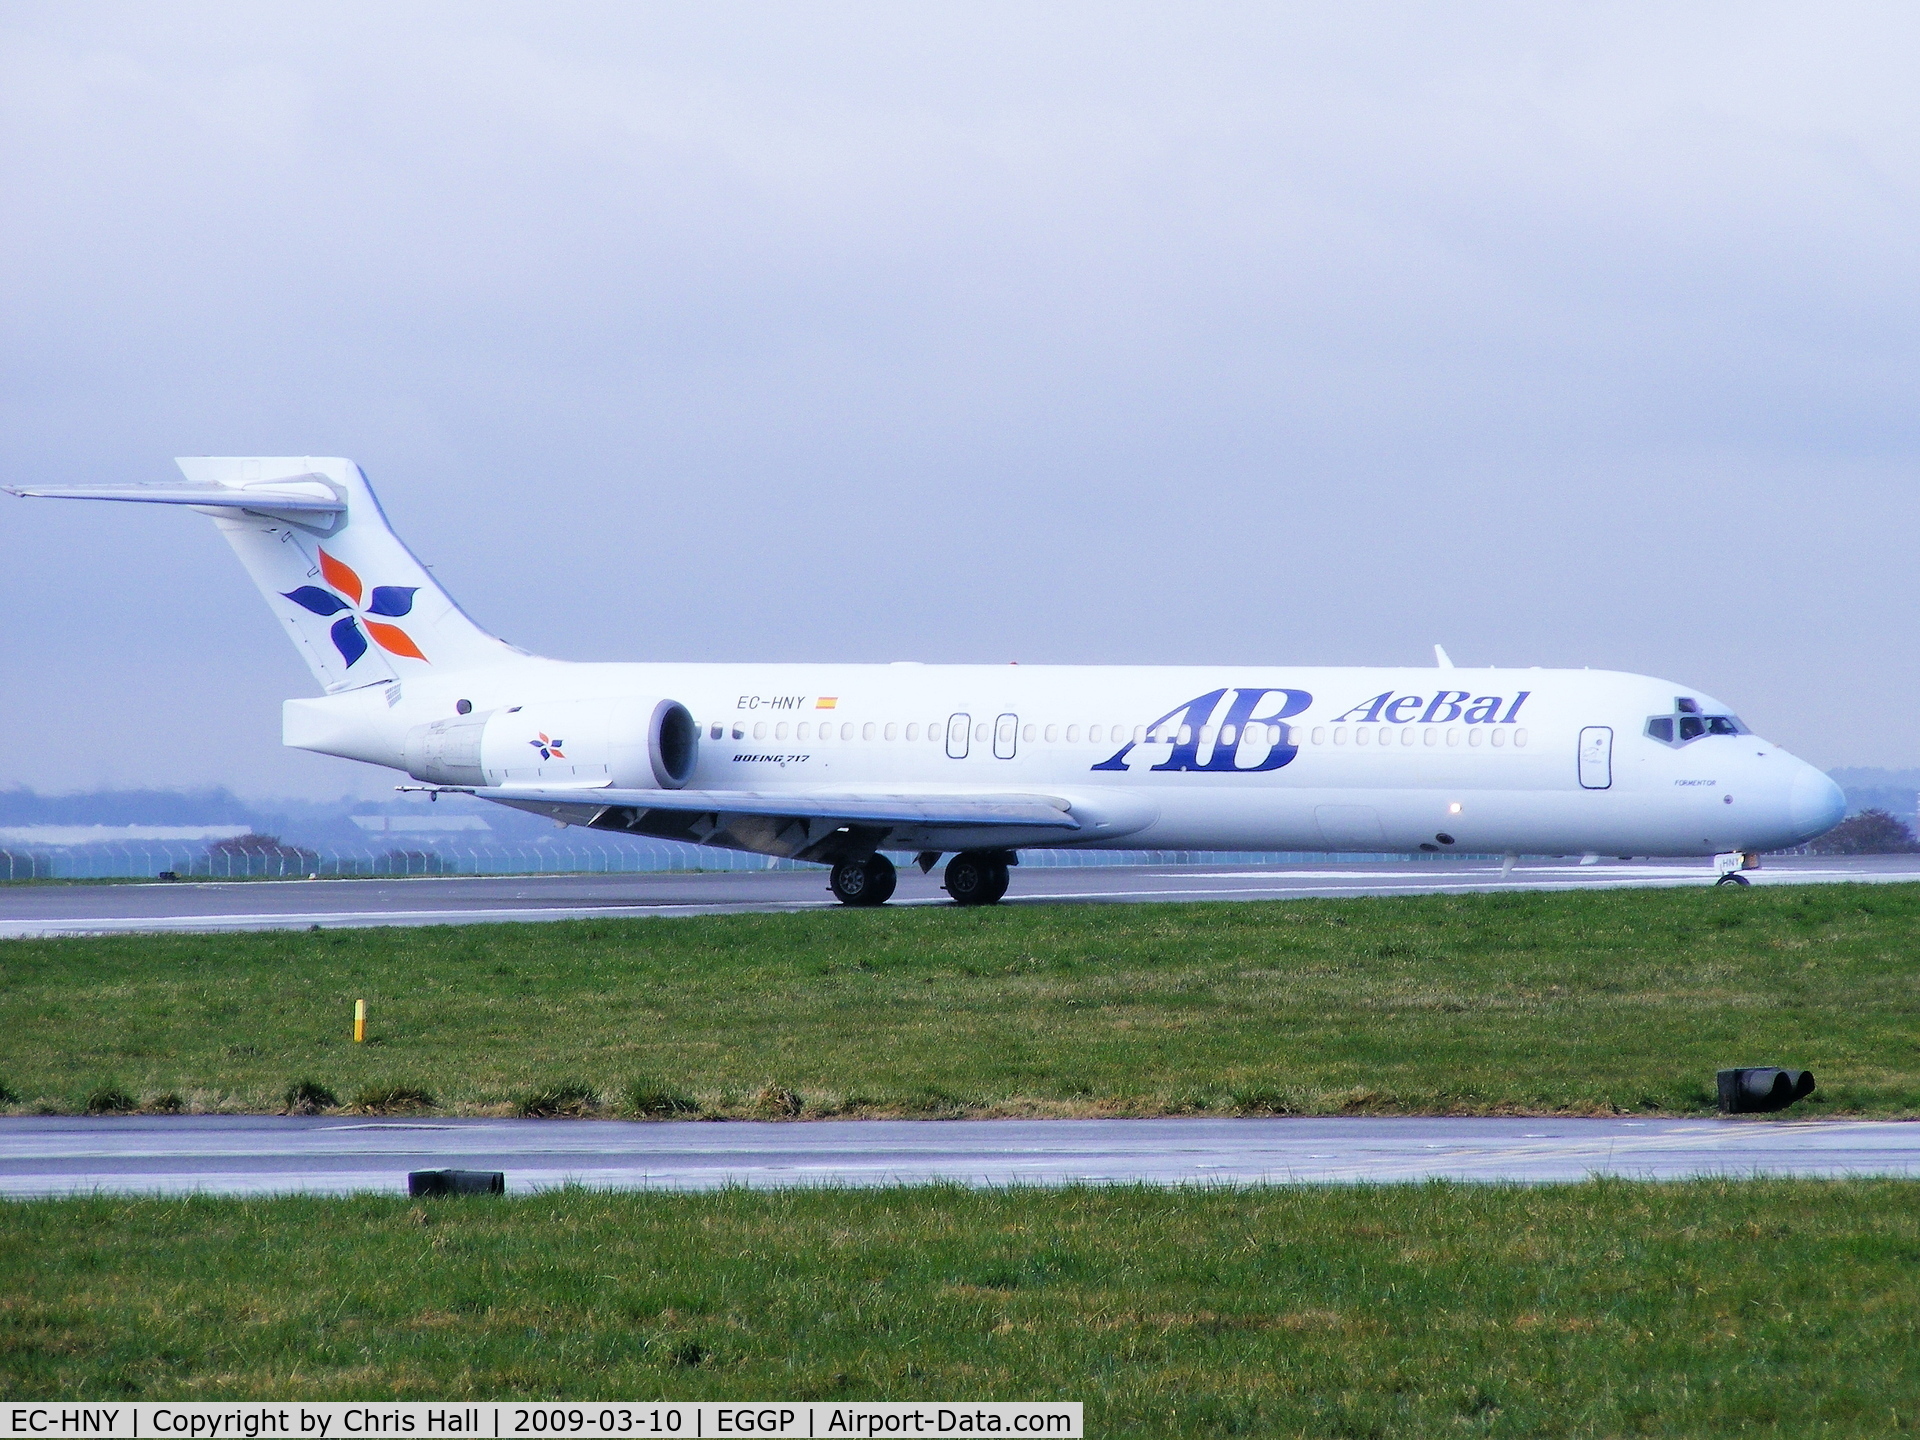 EC-HNY, 2000 Boeing 717-2CM C/N 55059, Bring Real Madrid fans in for the Champions League game against Liverpool FC